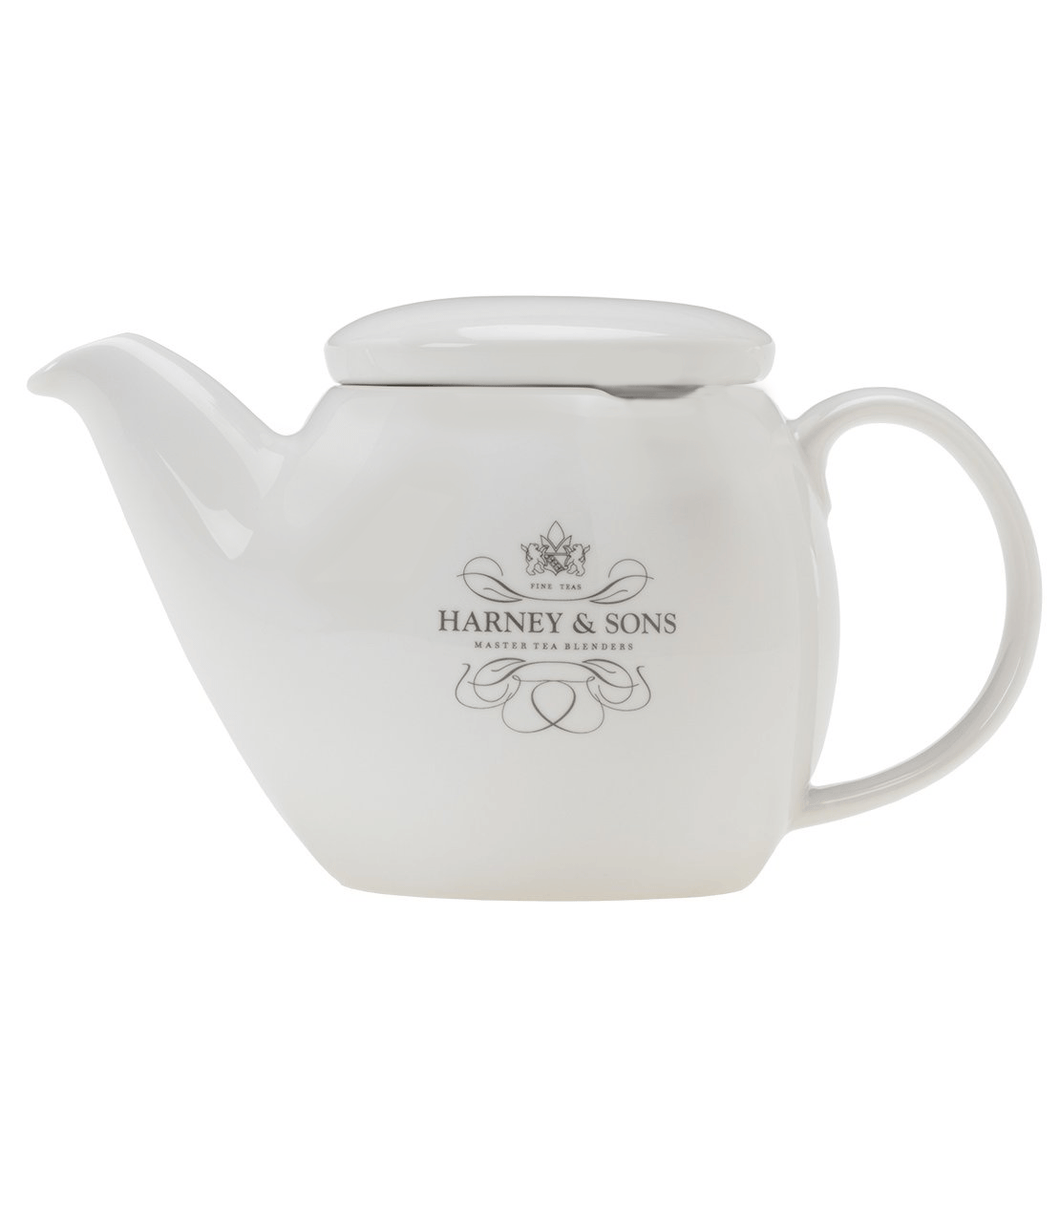 Harney & Sons Ceramic Teapot without Infuser (15 oz)